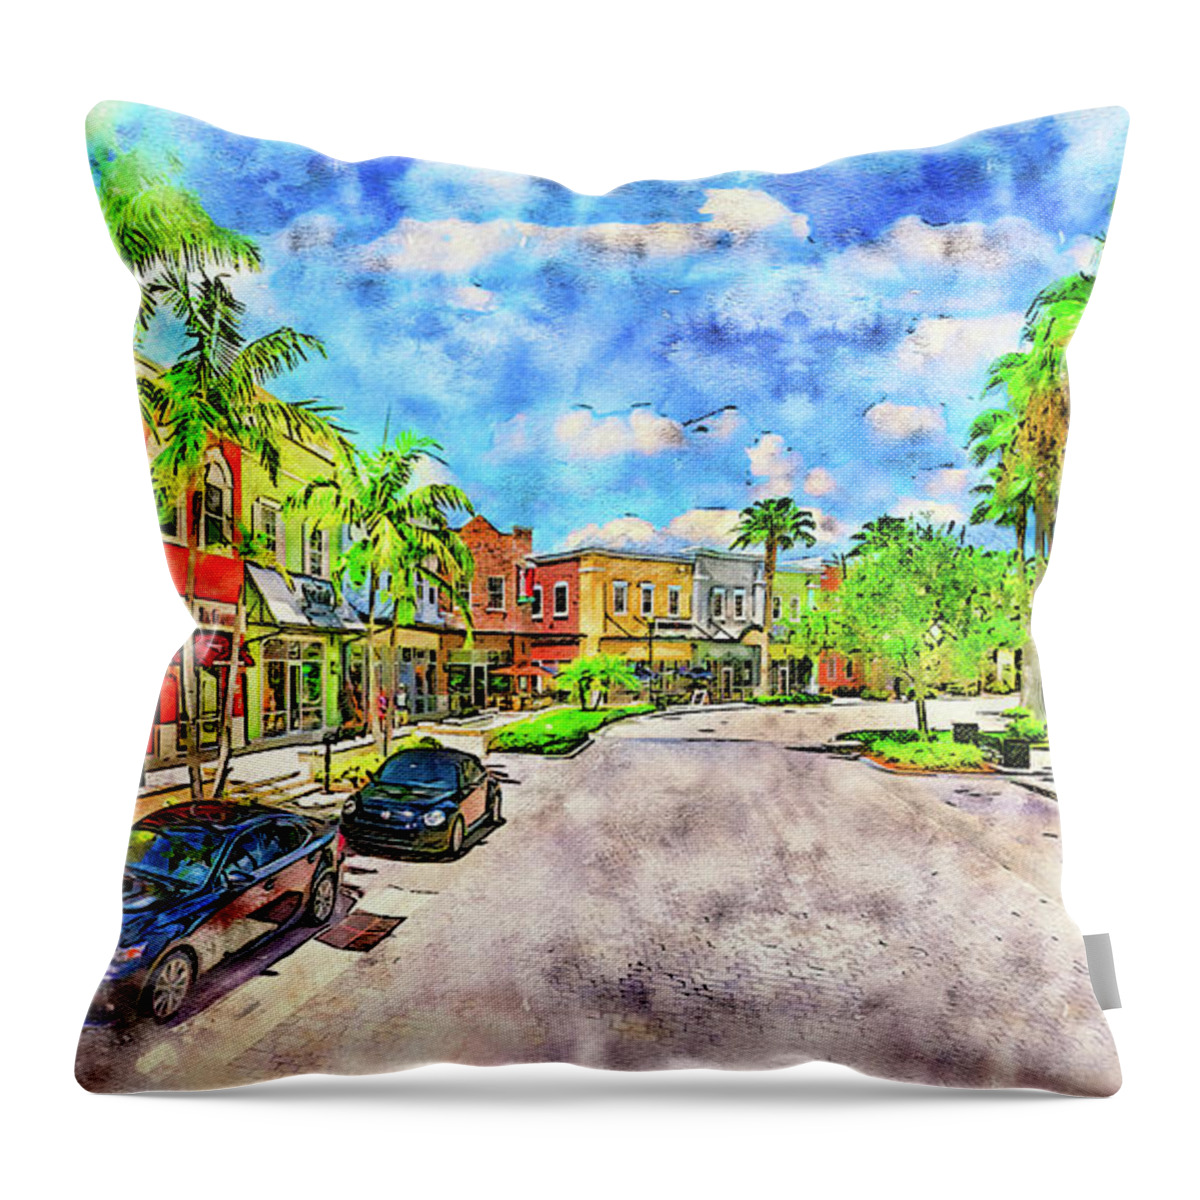 Tradition Square Throw Pillow featuring the digital art Tradition Square in Port St. Lucie, Florida - pen and watercolor by Nicko Prints